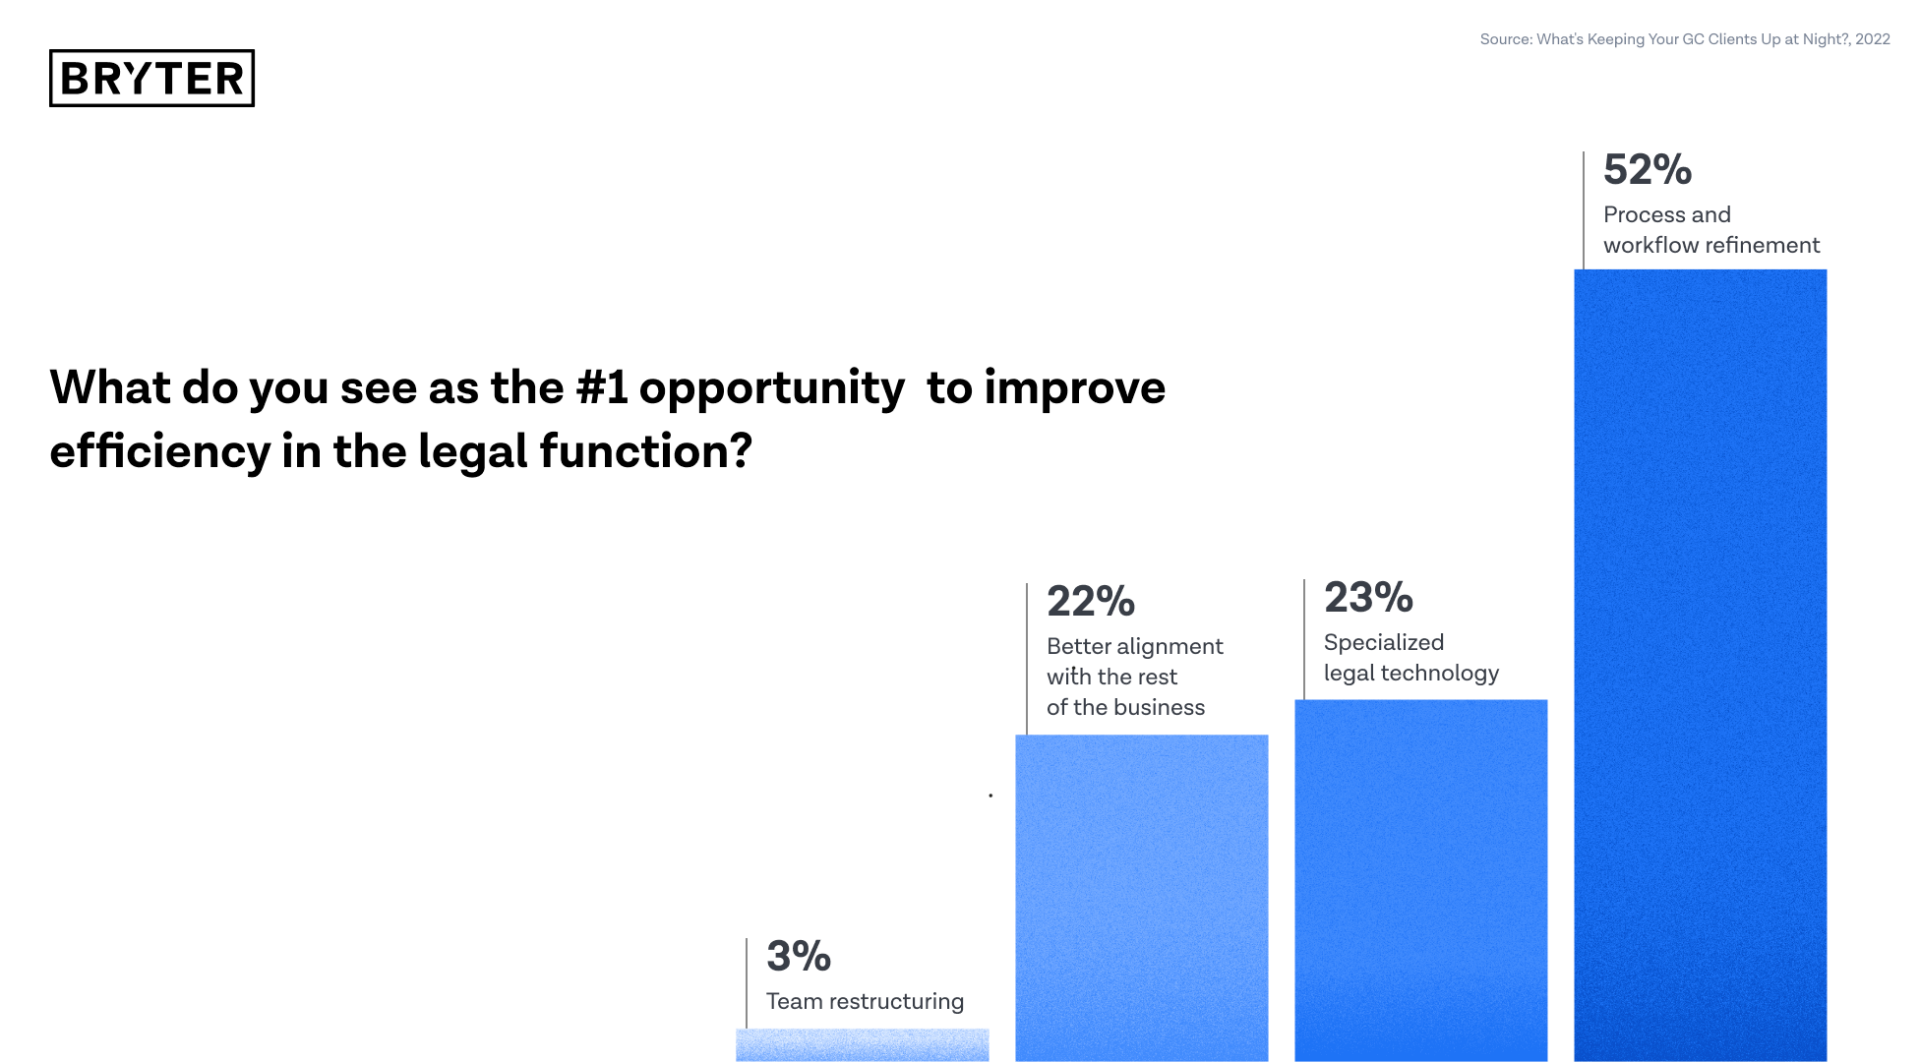 Top opportunities for legal to improve